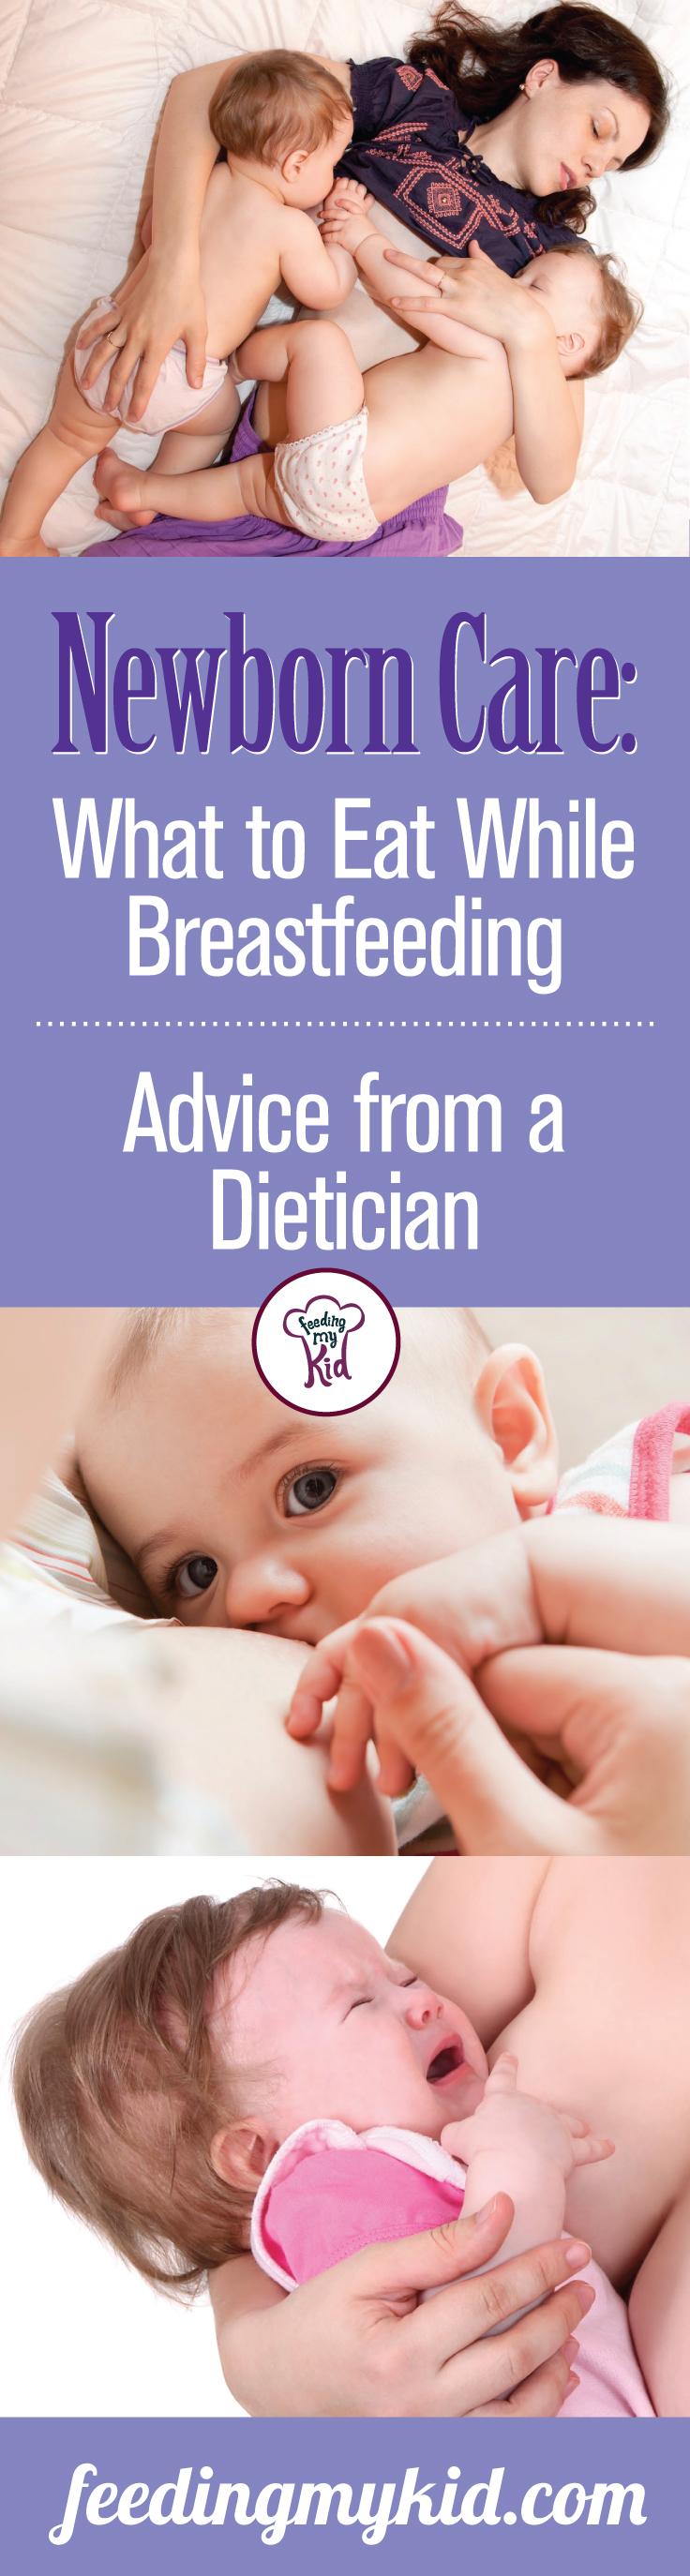 Newborn Care: What to Eat While Breastfeeding. Advice from a Dietician.